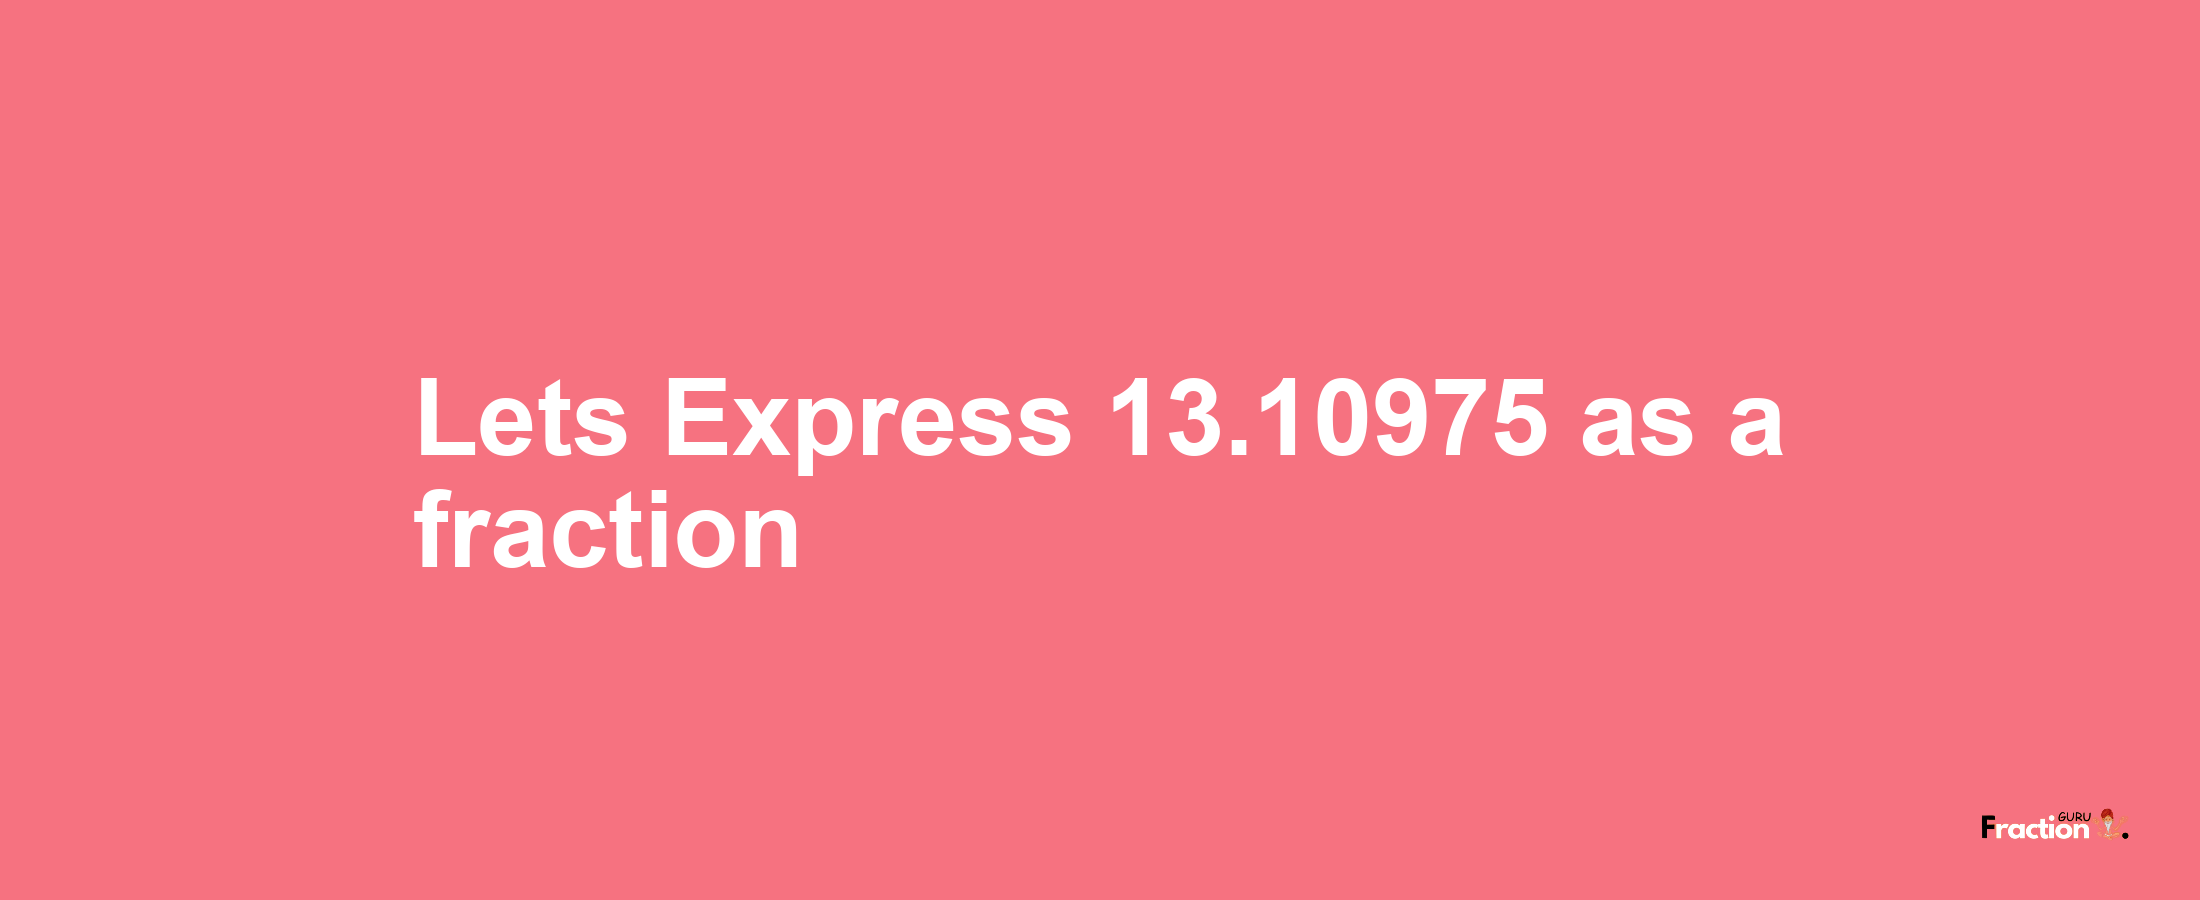 Lets Express 13.10975 as afraction